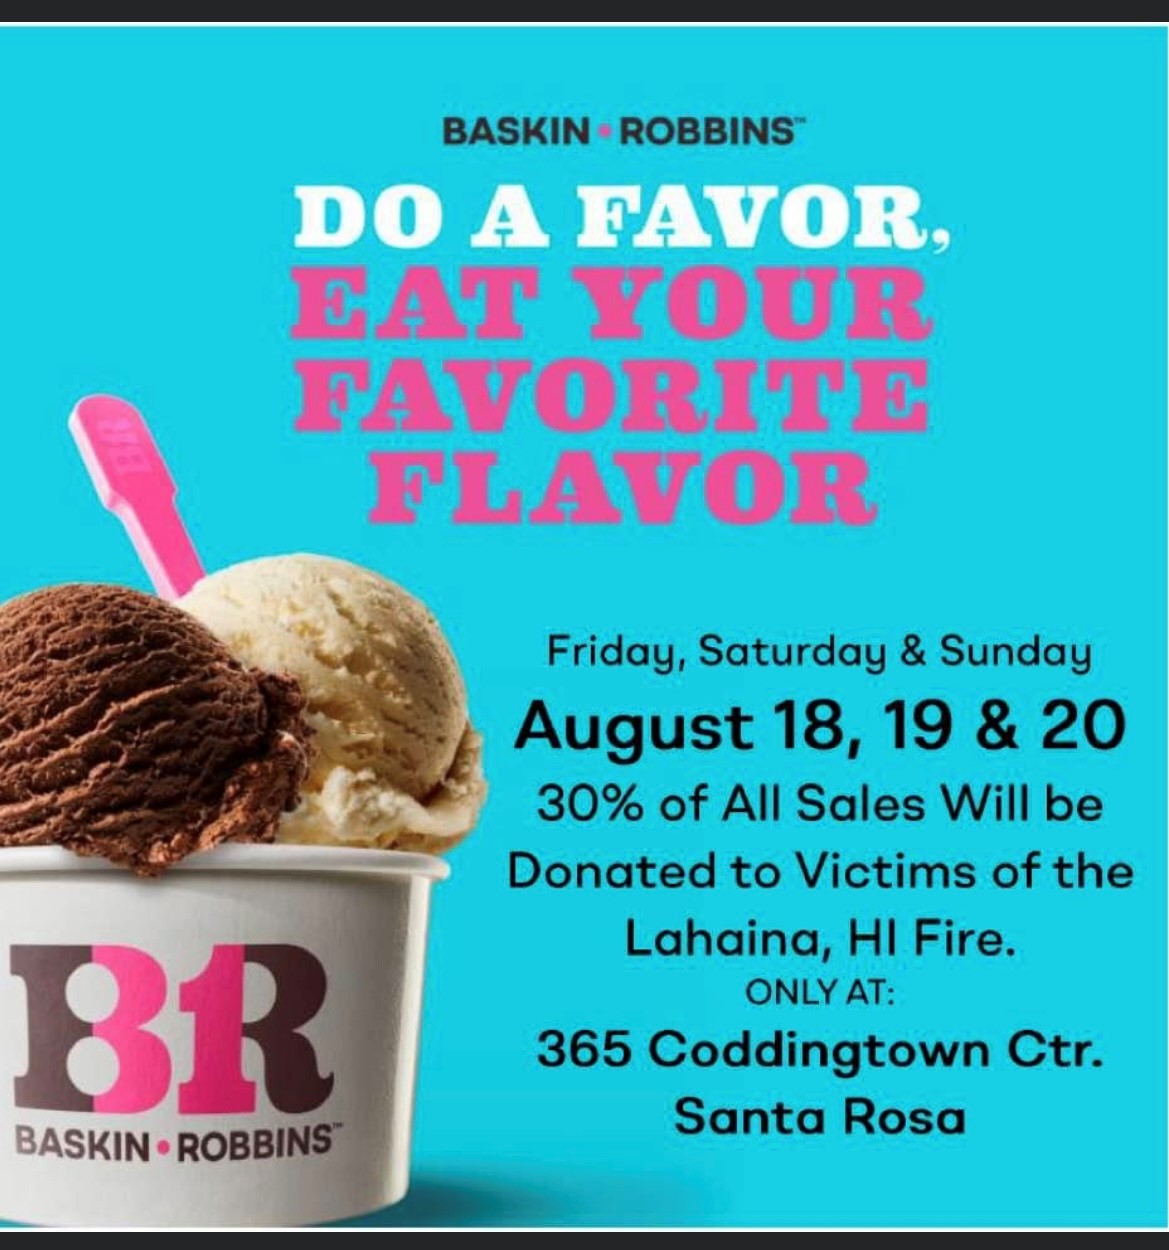 Friday, Saturday and Sunday. August 18, 19, & 20 30% of ALL SALES will be DONATED to VICTIMS of the Lahaina, HI fire. Only at 365 Coddingtown Ctr., Santa Rosa, CA.